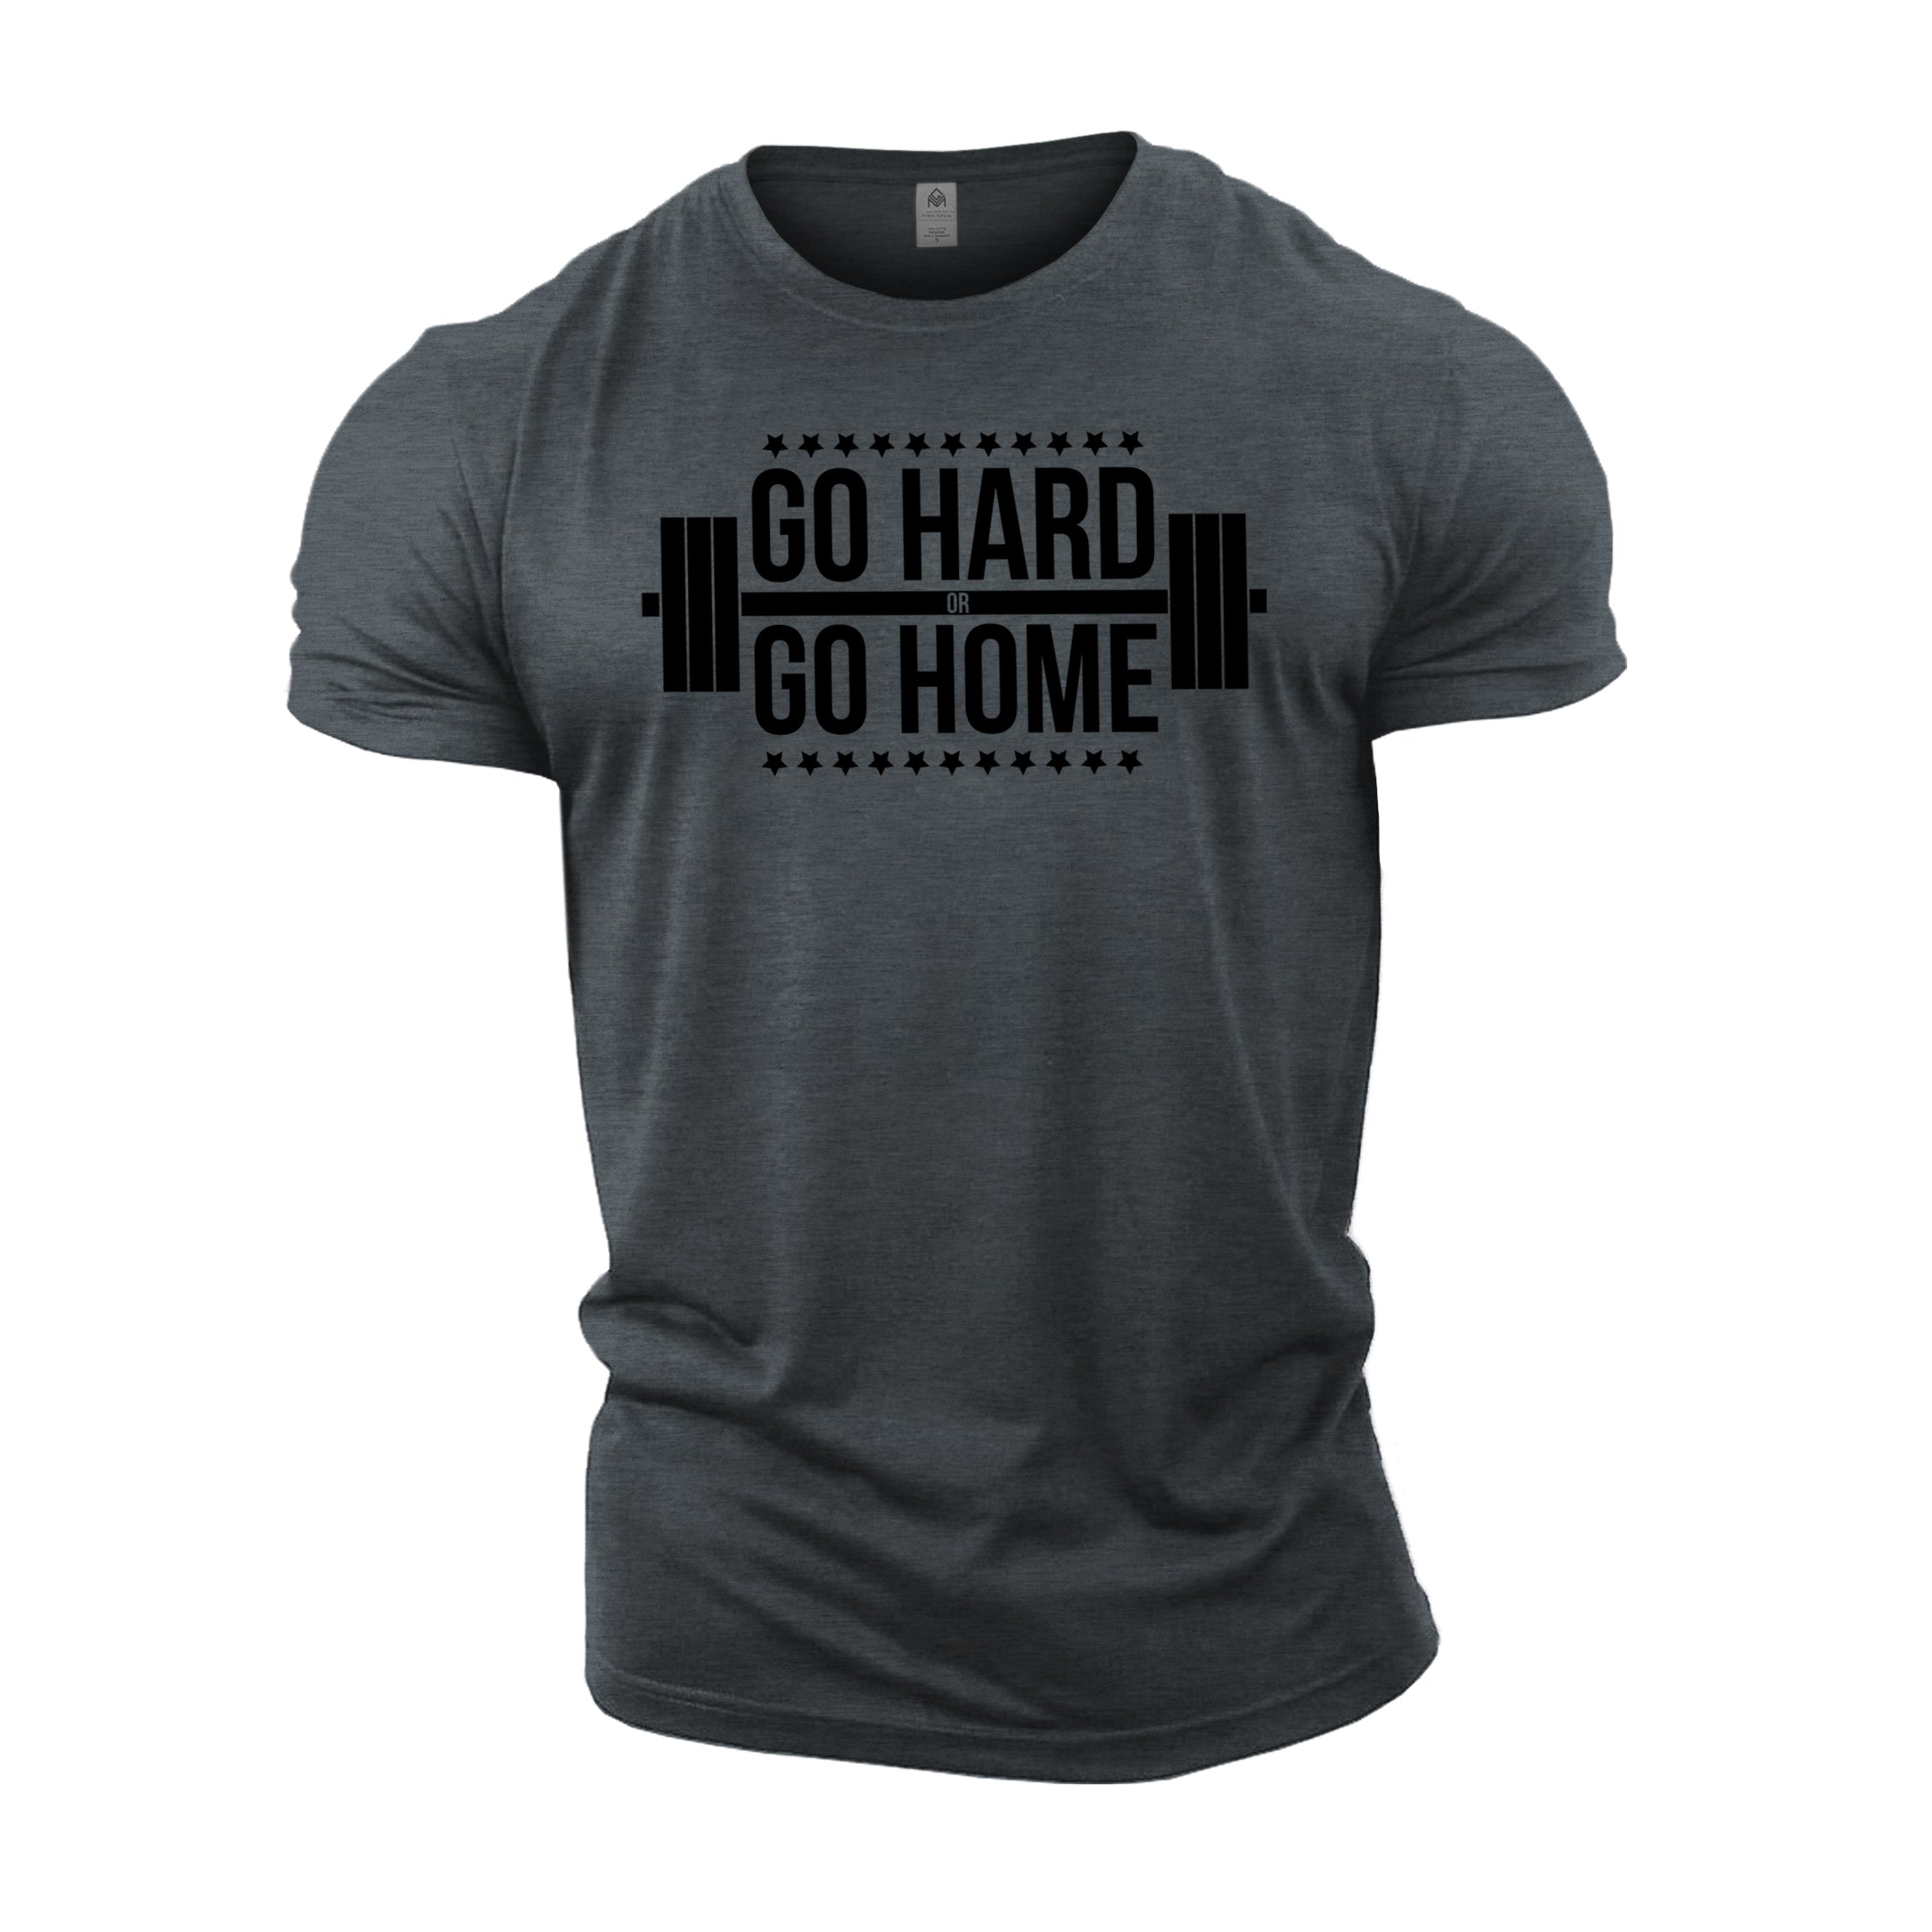 Go Hard Or Go To Planet Fitness T Shirt Men's 50/50 T-Shirt